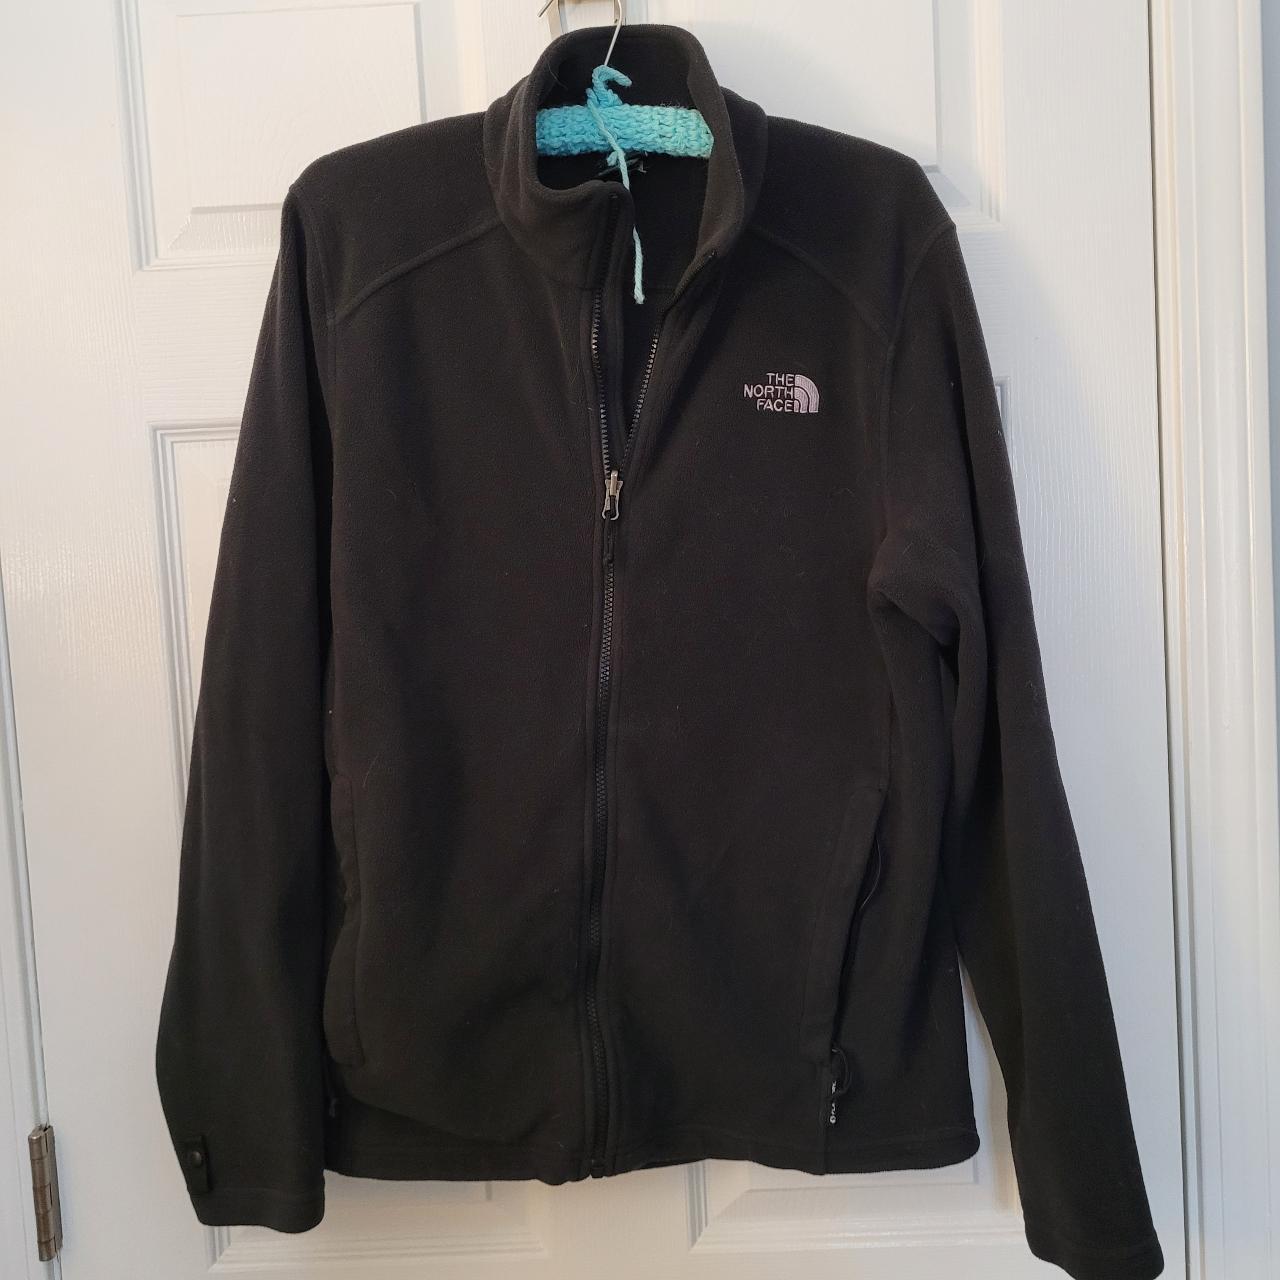 The North Face Men's Brown and Black Jacket